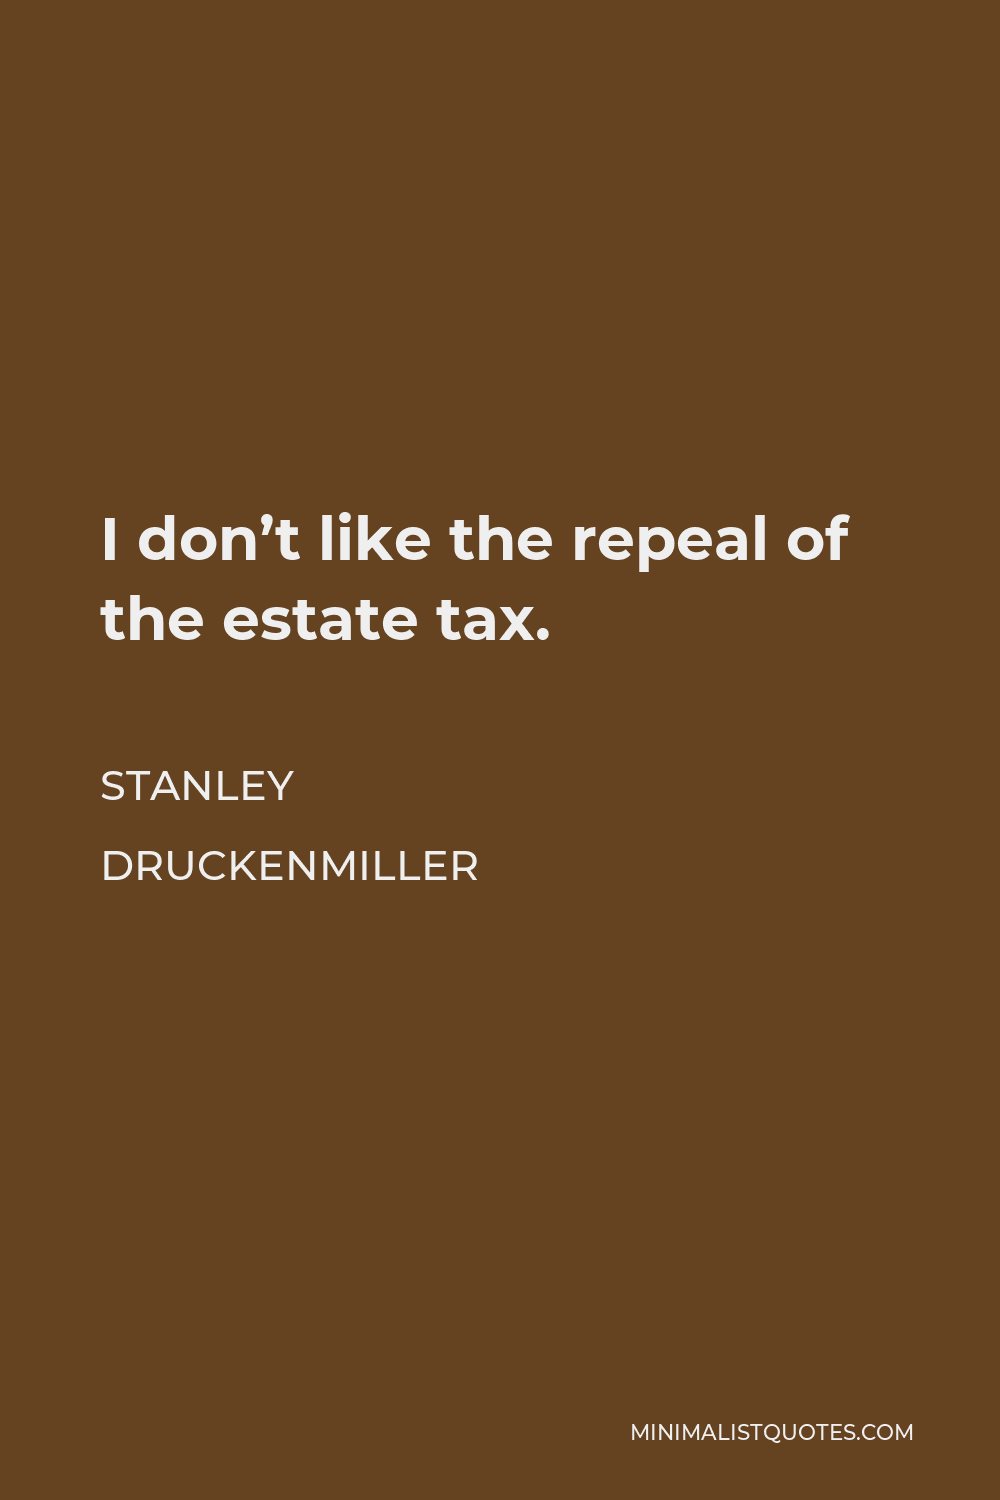 Stanley Druckenmiller Quote - I don’t like the repeal of the estate tax.